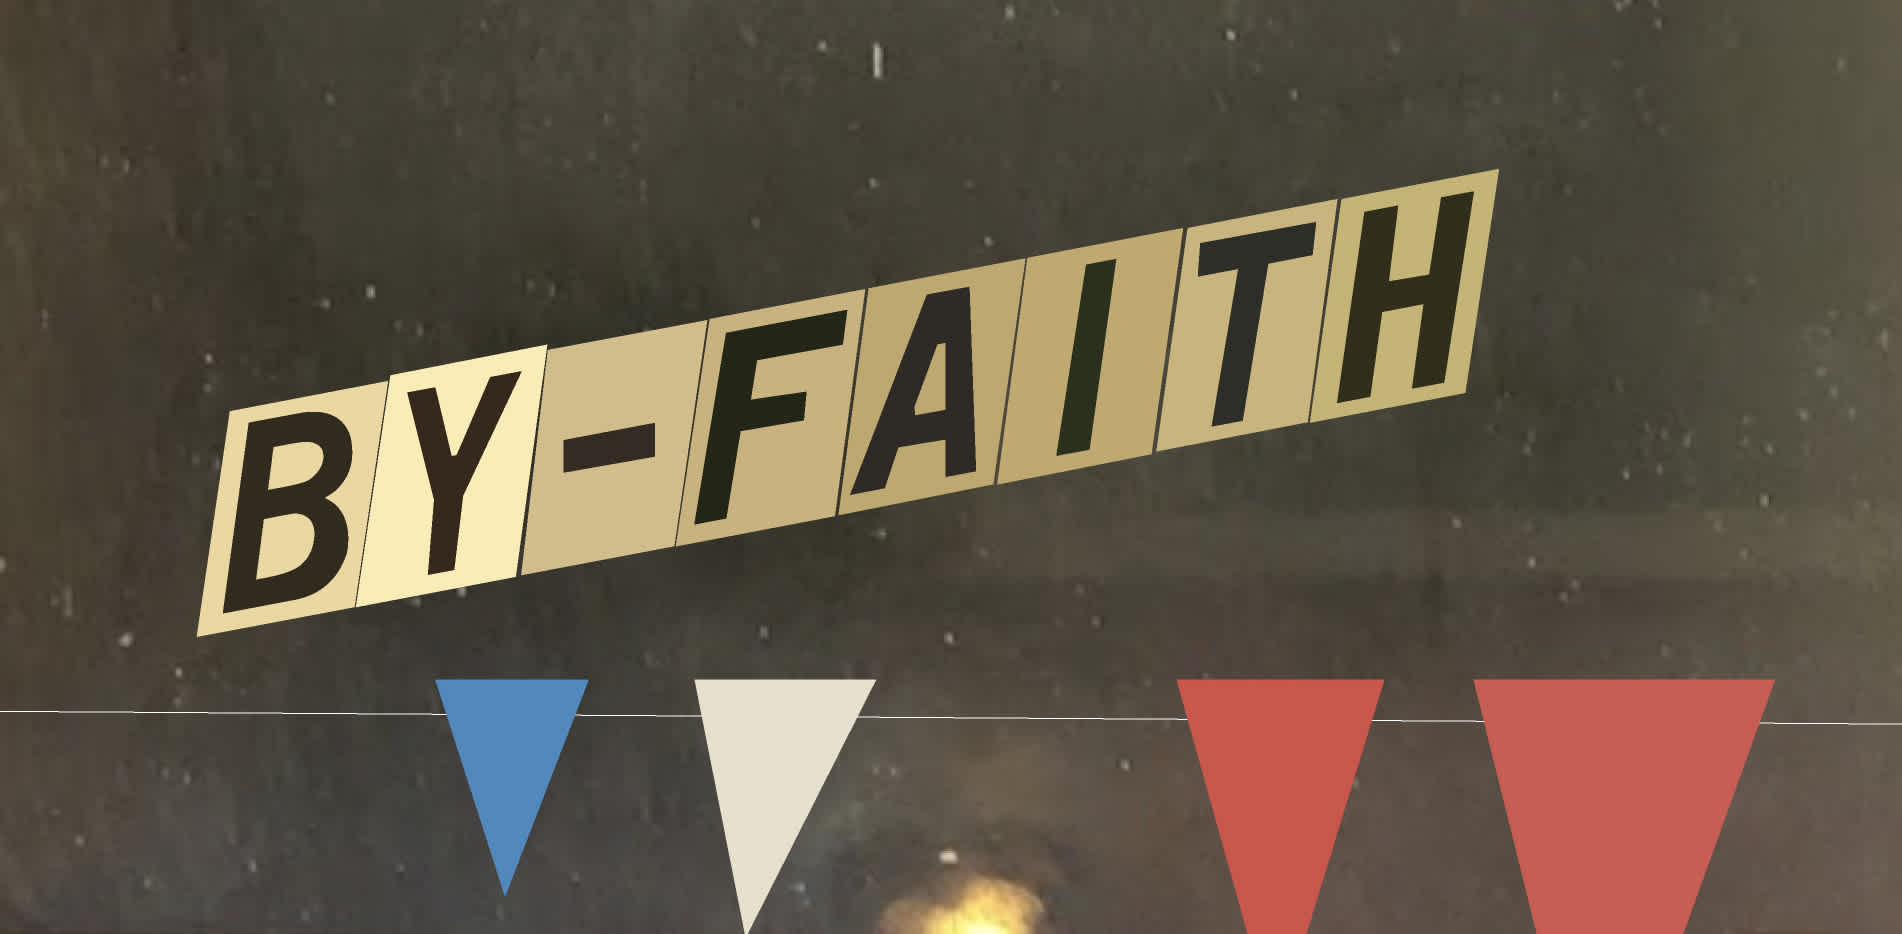 A sign reads "By-Faith" in black text on brass metal tiles.